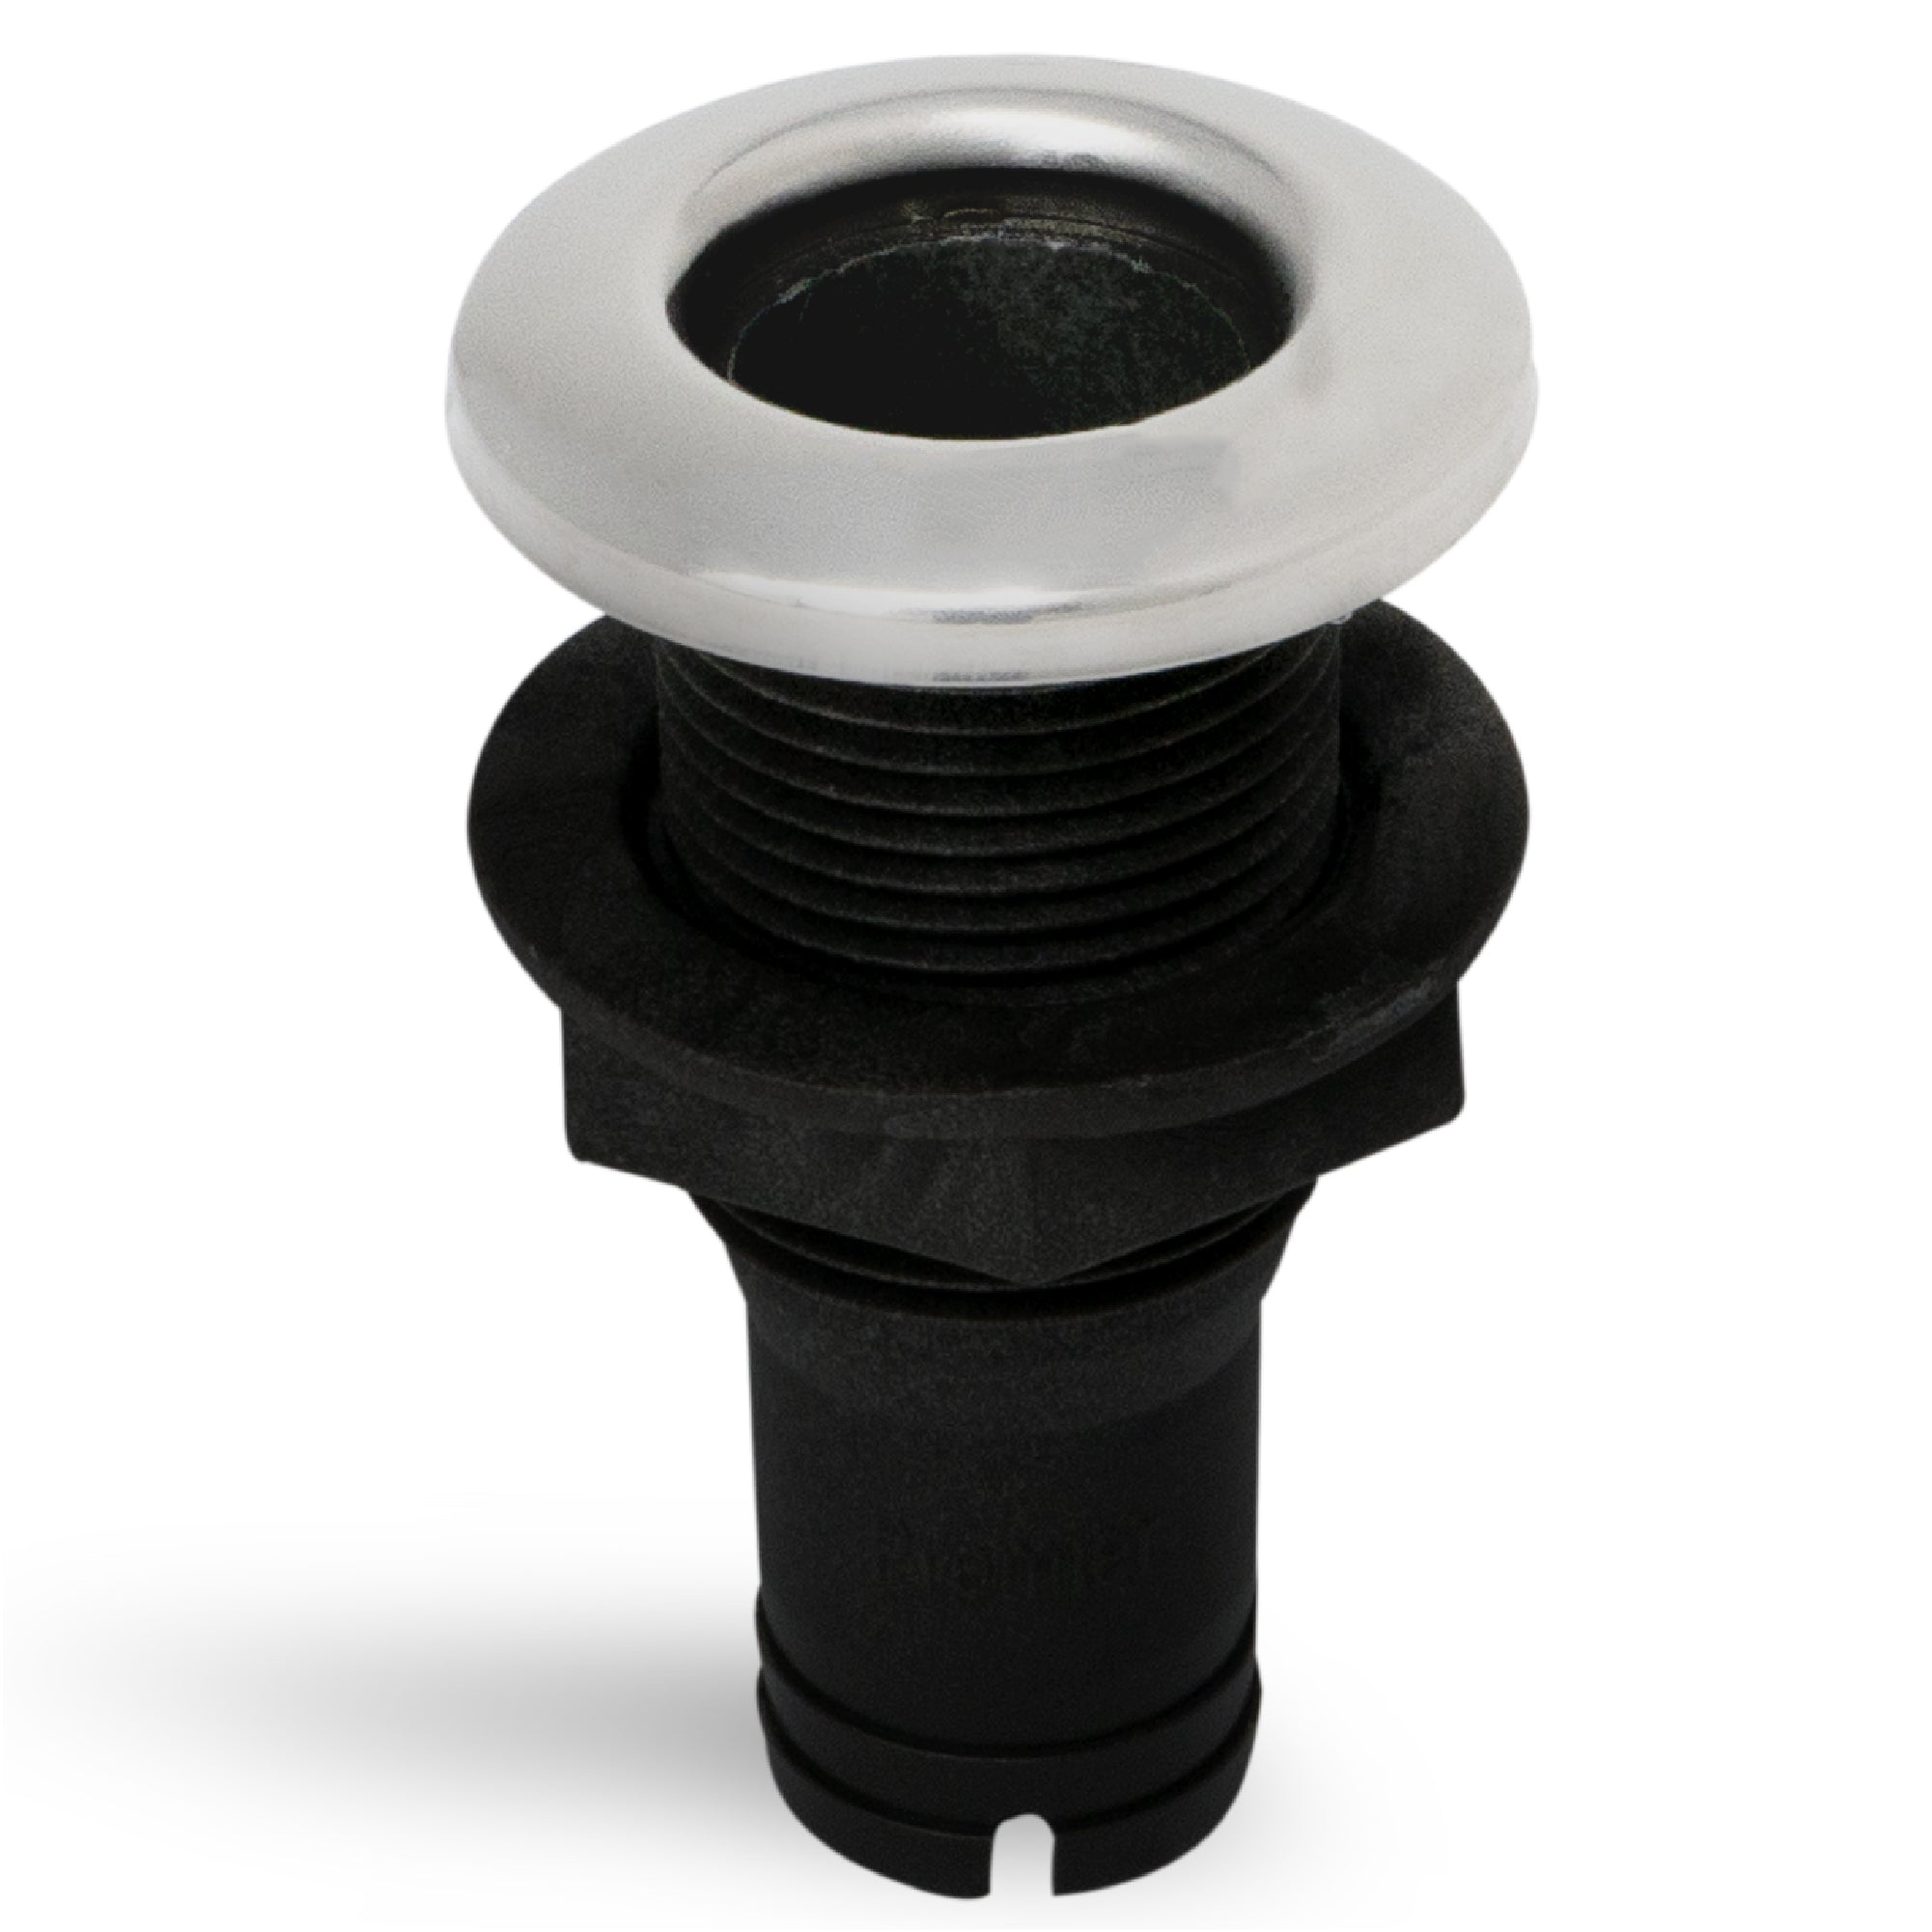 Thru-Hull Fitting Connection for Hose, 3/4" Black - FO2995